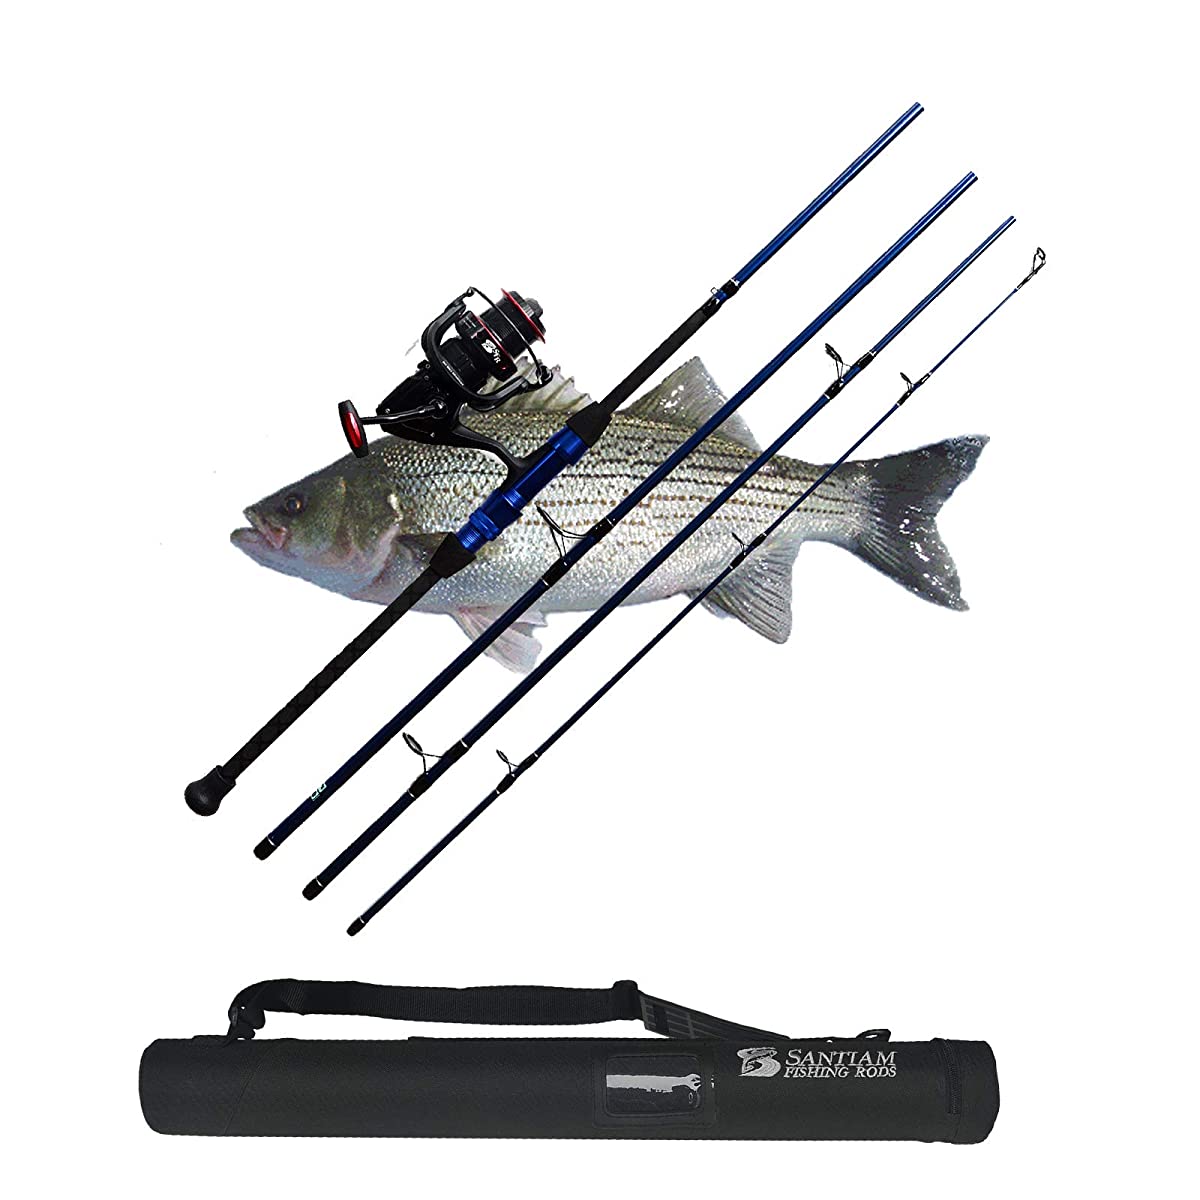 Travel Fishing Rods, Travel Surf Rods